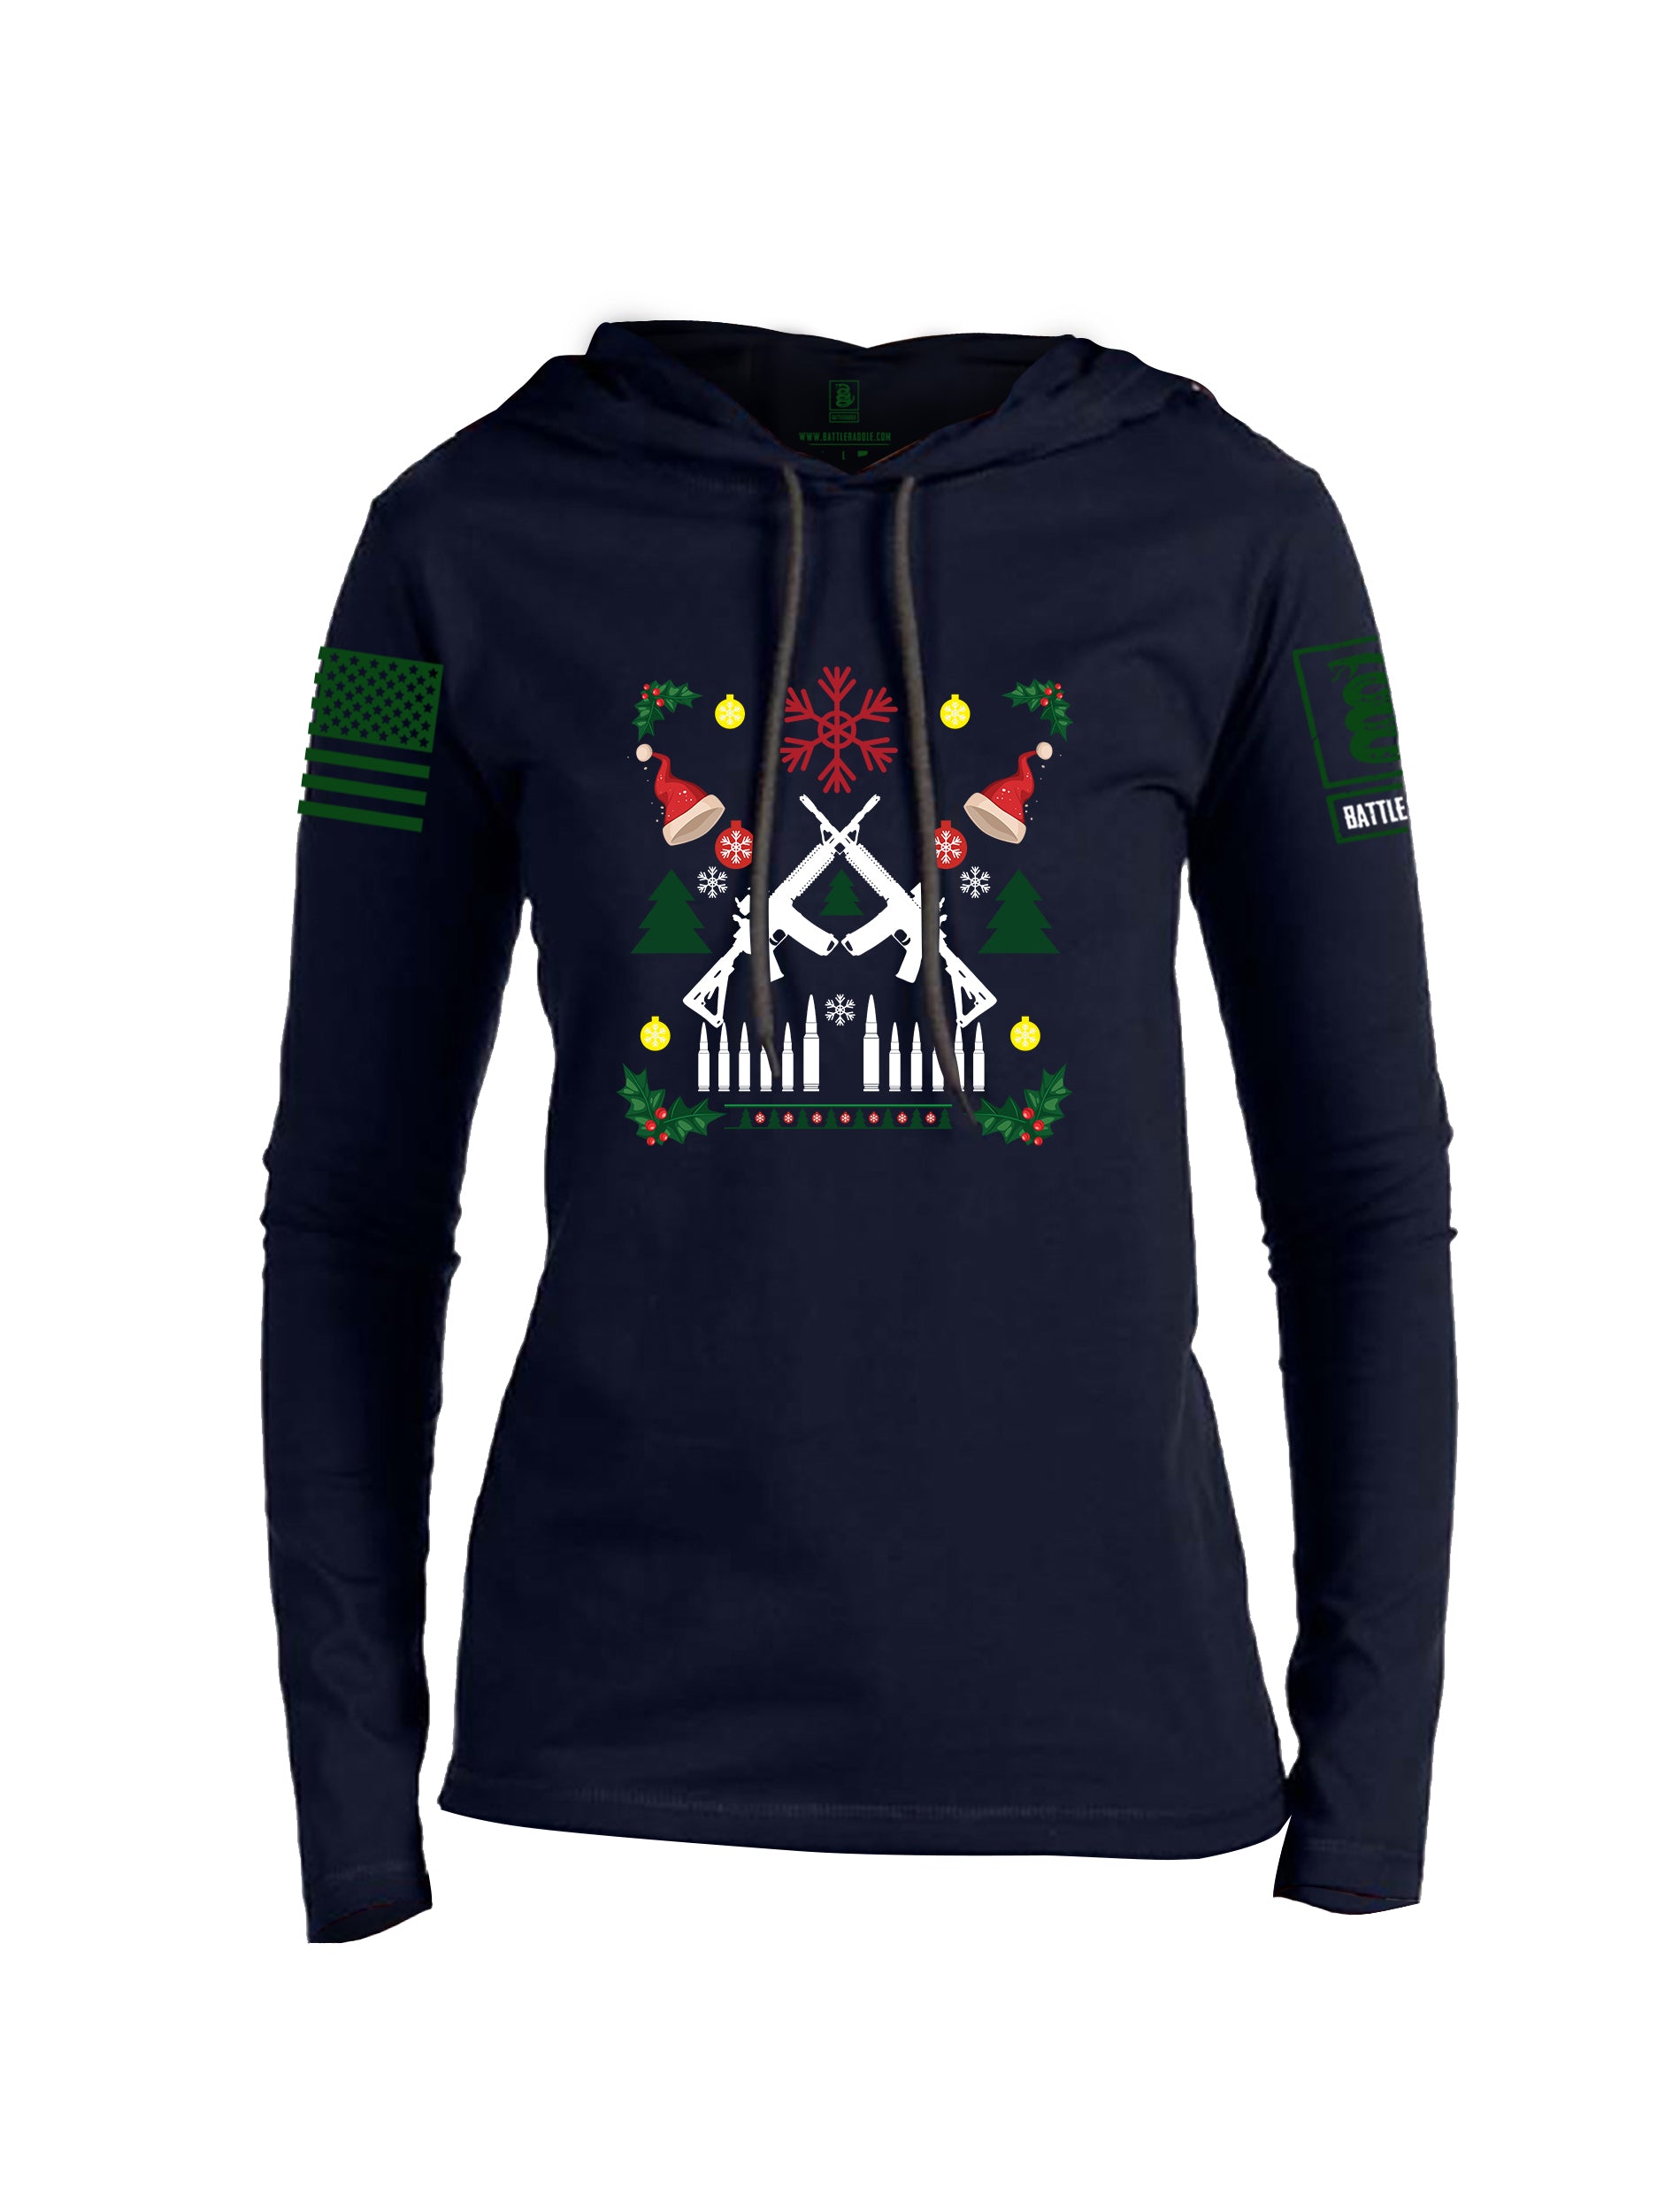 Battleraddle AR15 Cross Rifle Bullet Links Christmas Holiday Ugly Green Sleeve Womens Thin Cotton Lightweight Hoodie